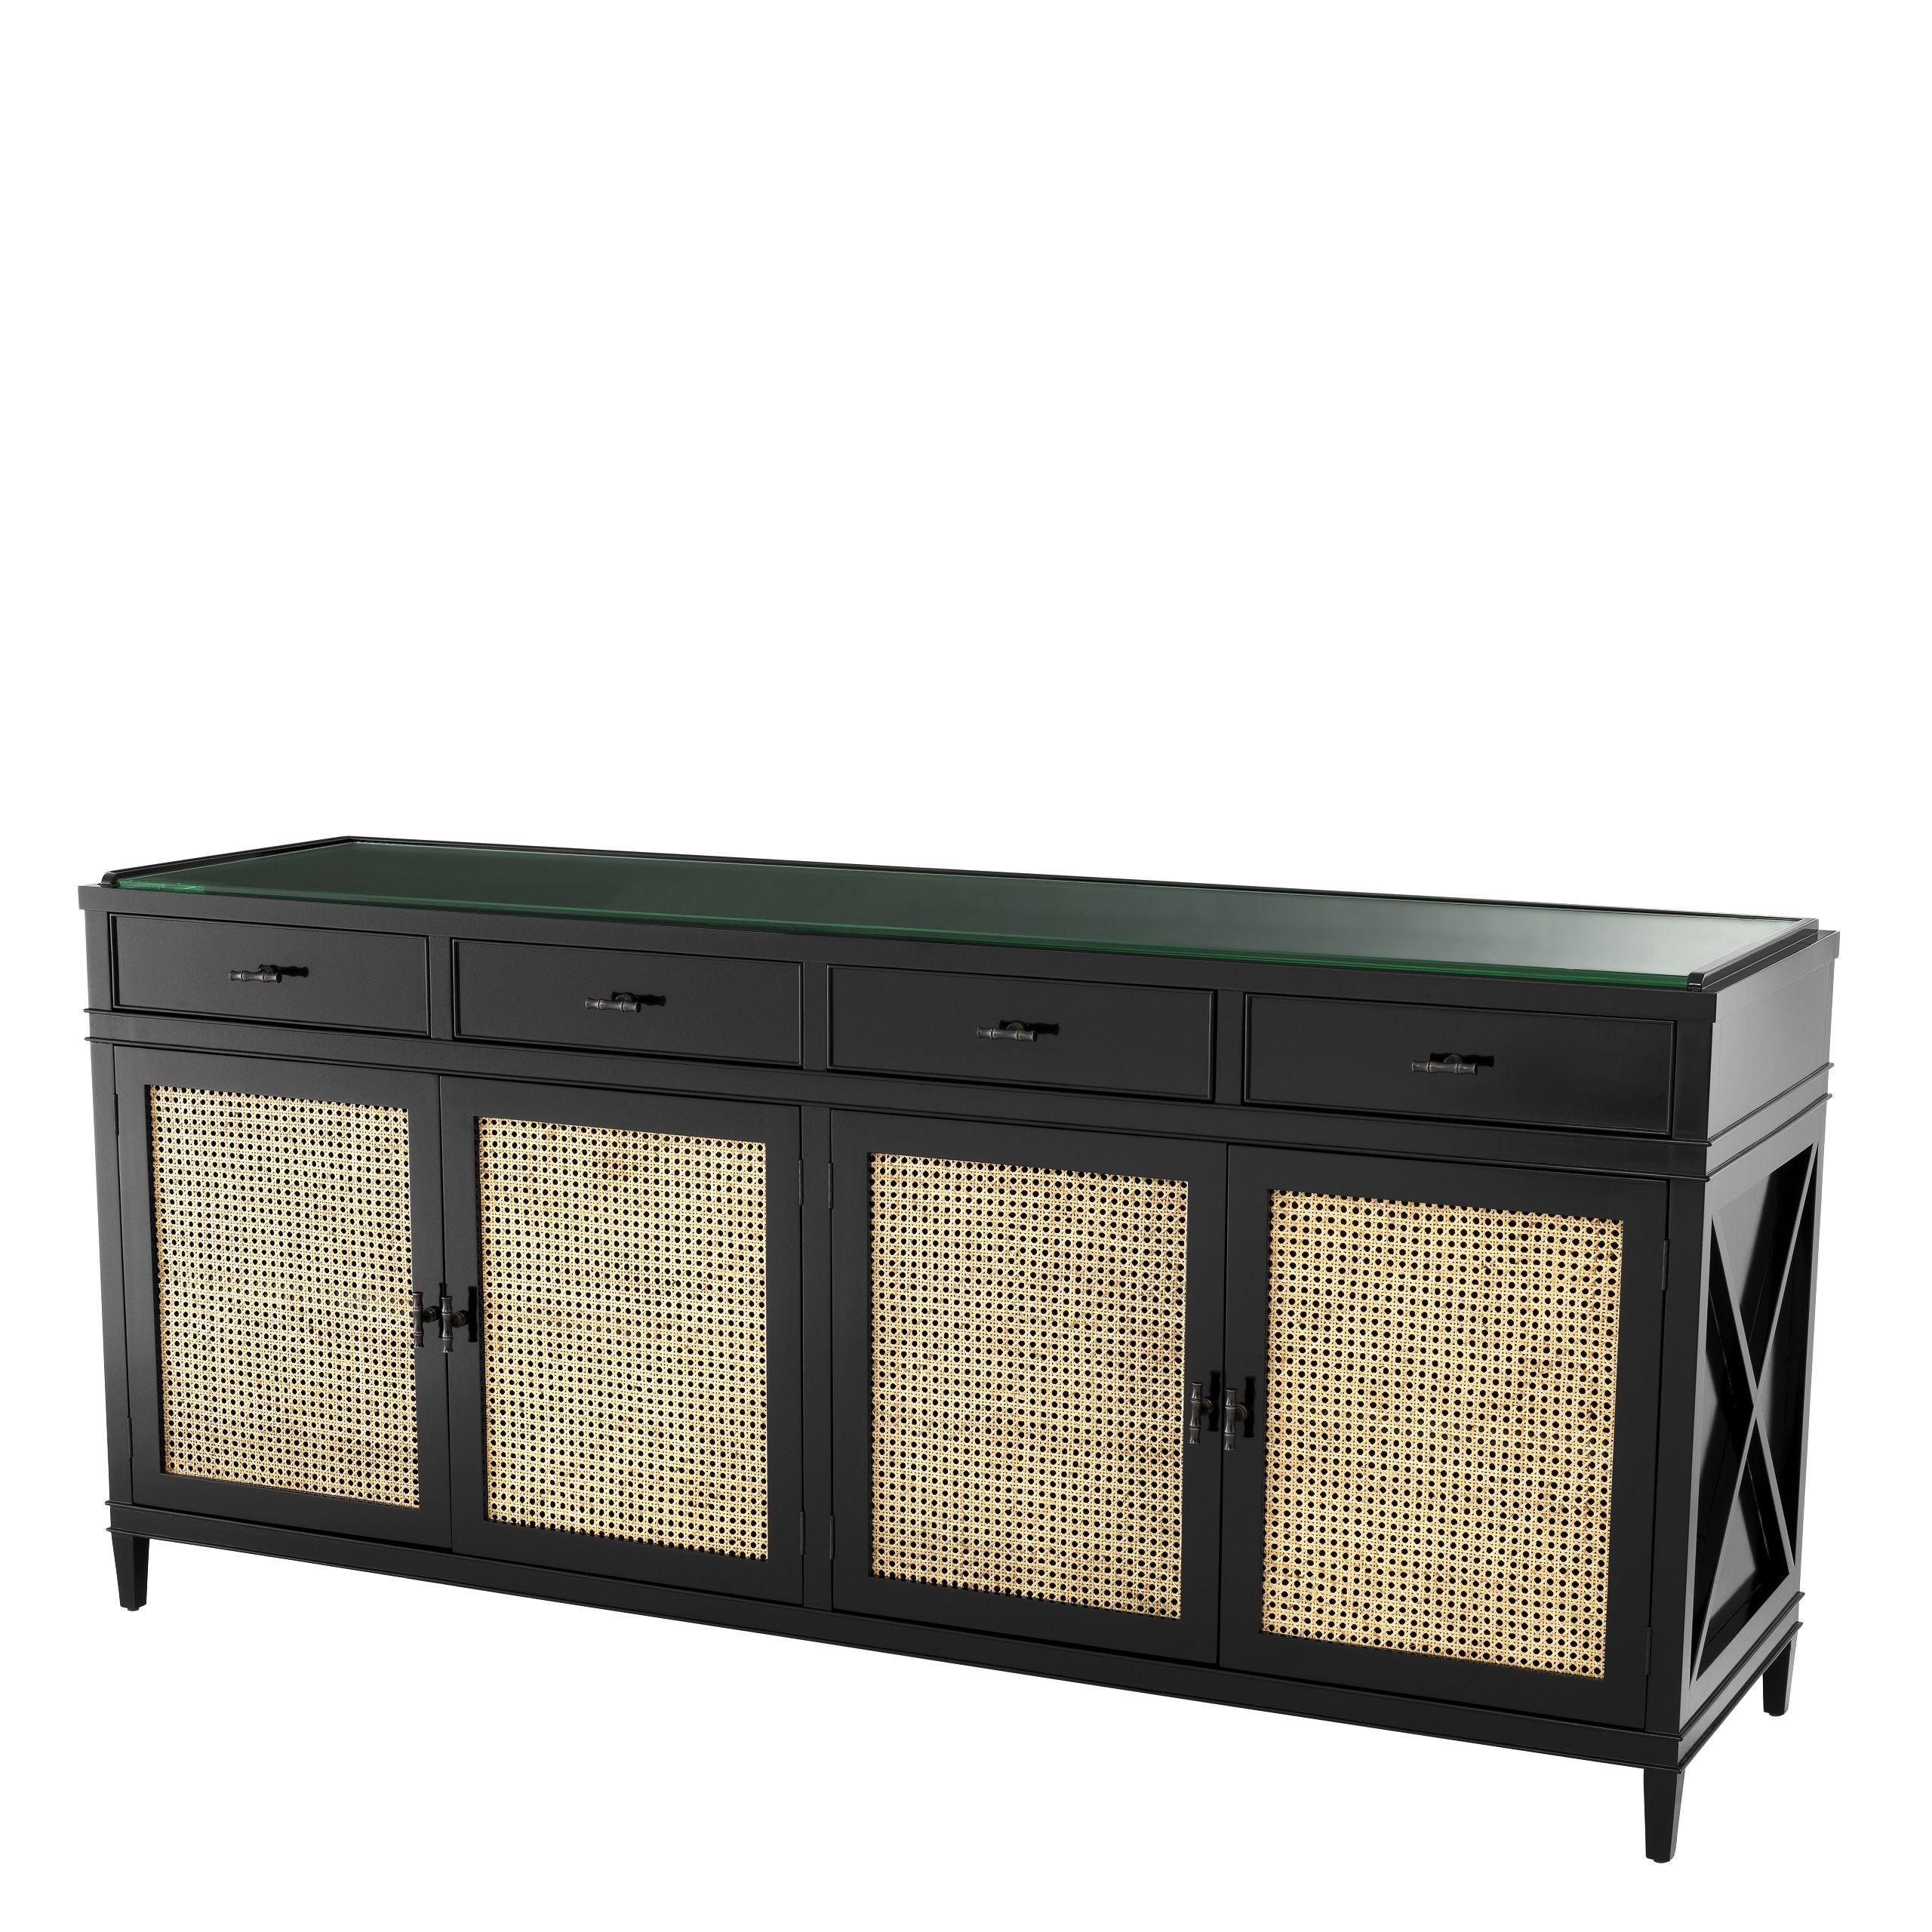 Black lacquer wooden structure adorned with woven cane panels doors and glass tray Art Deco style sideboard.